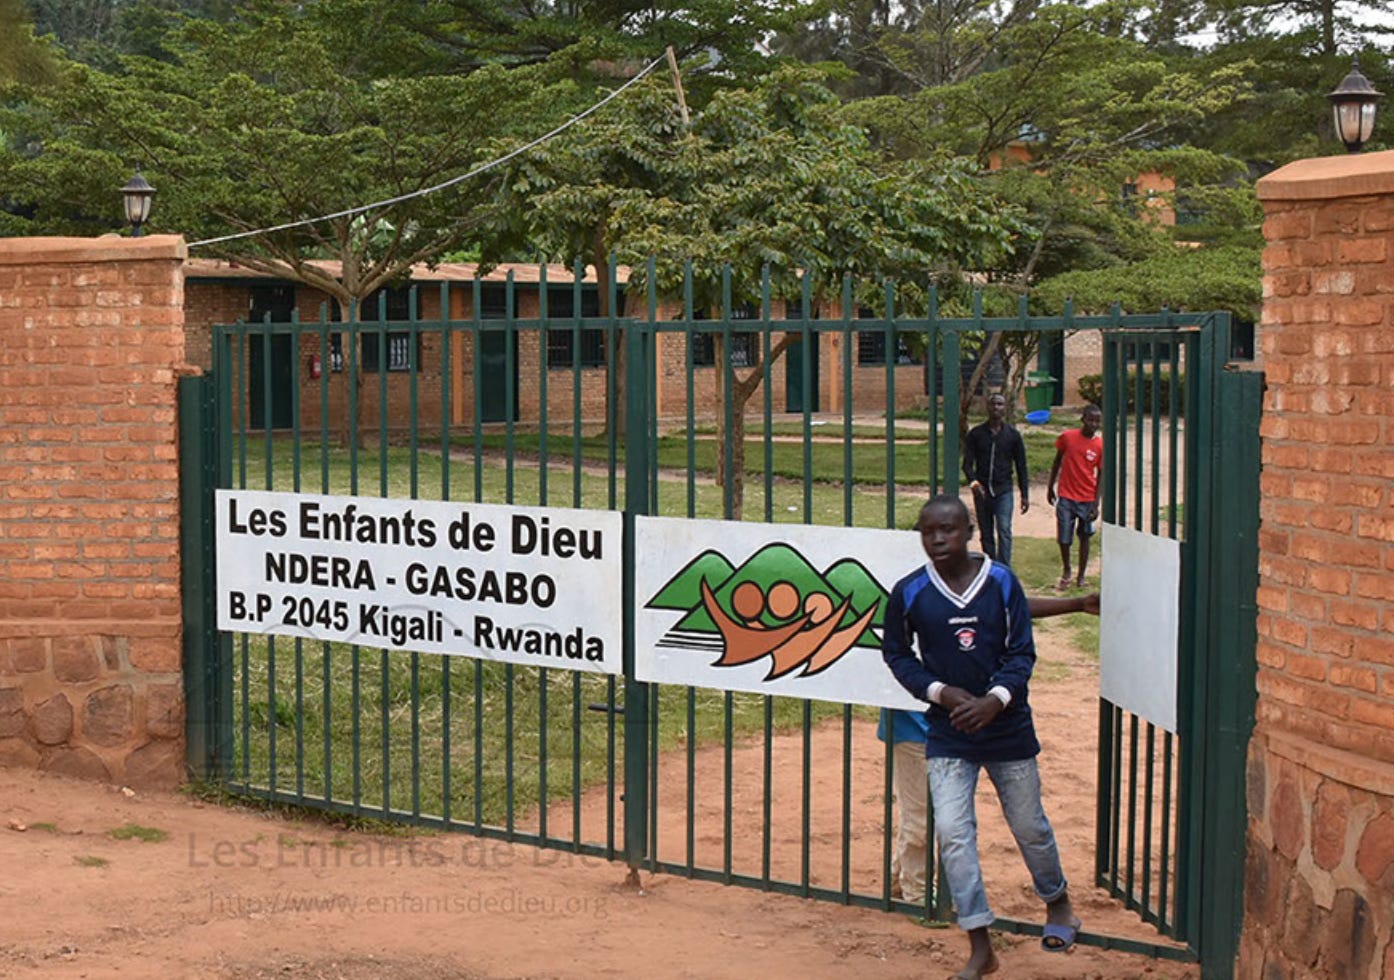 Rwandan boy, age about 10, welcoming us to the Les Enfants de Dieu home. He is standing at the front gate, with the door open and grounds and buildings in background